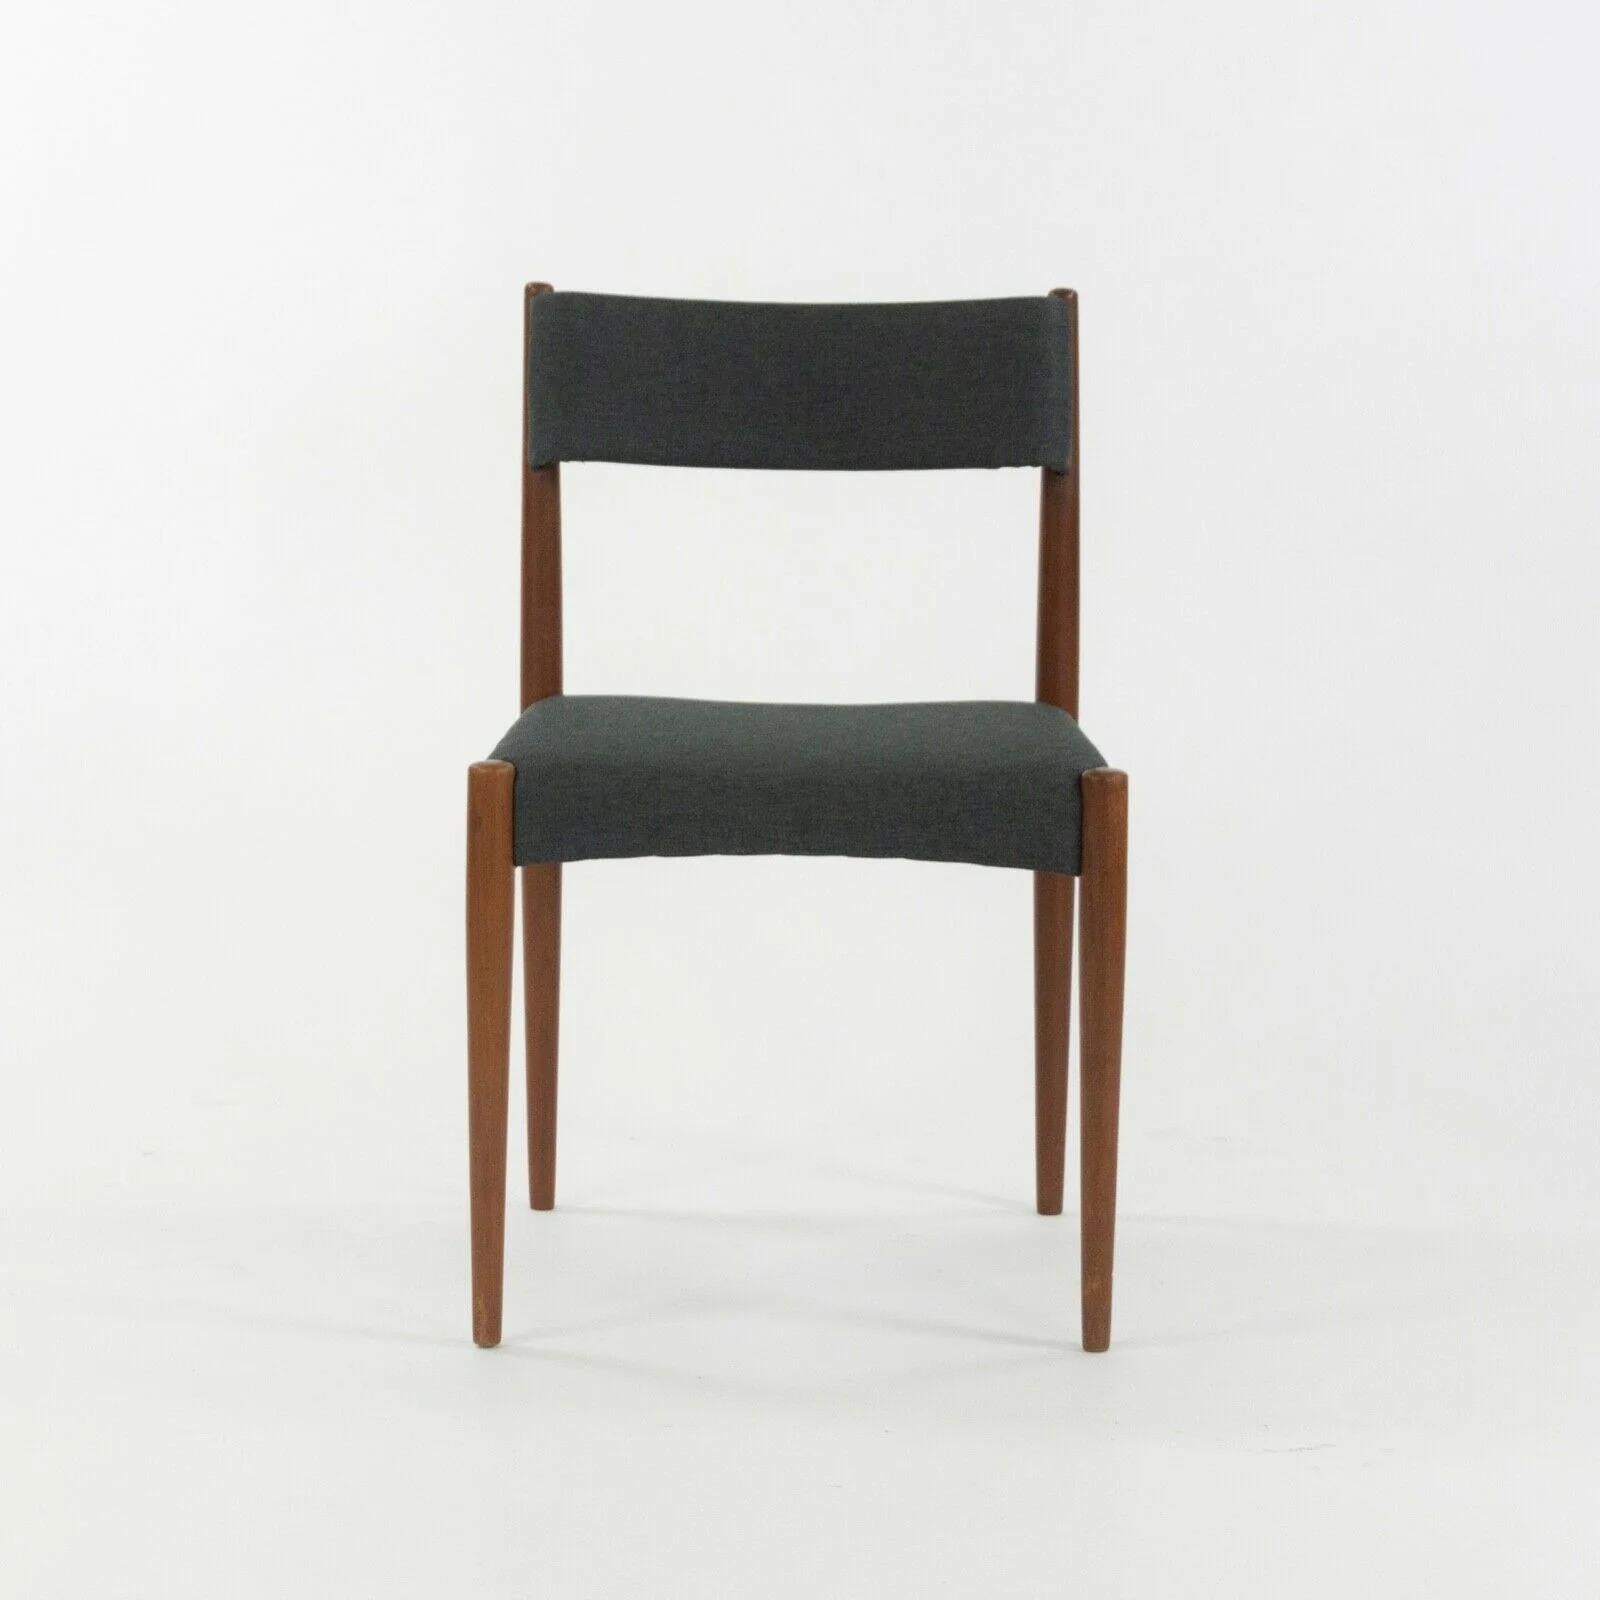 Listed for sale is a beautiful set of 5 Knud Faerch for Bovenkamp dining chairs, made in The Netherlands during the 1960's. These have been professionally reupholstered by masterful upholsterers at Forthright NYC. The chairs were reupholstered in